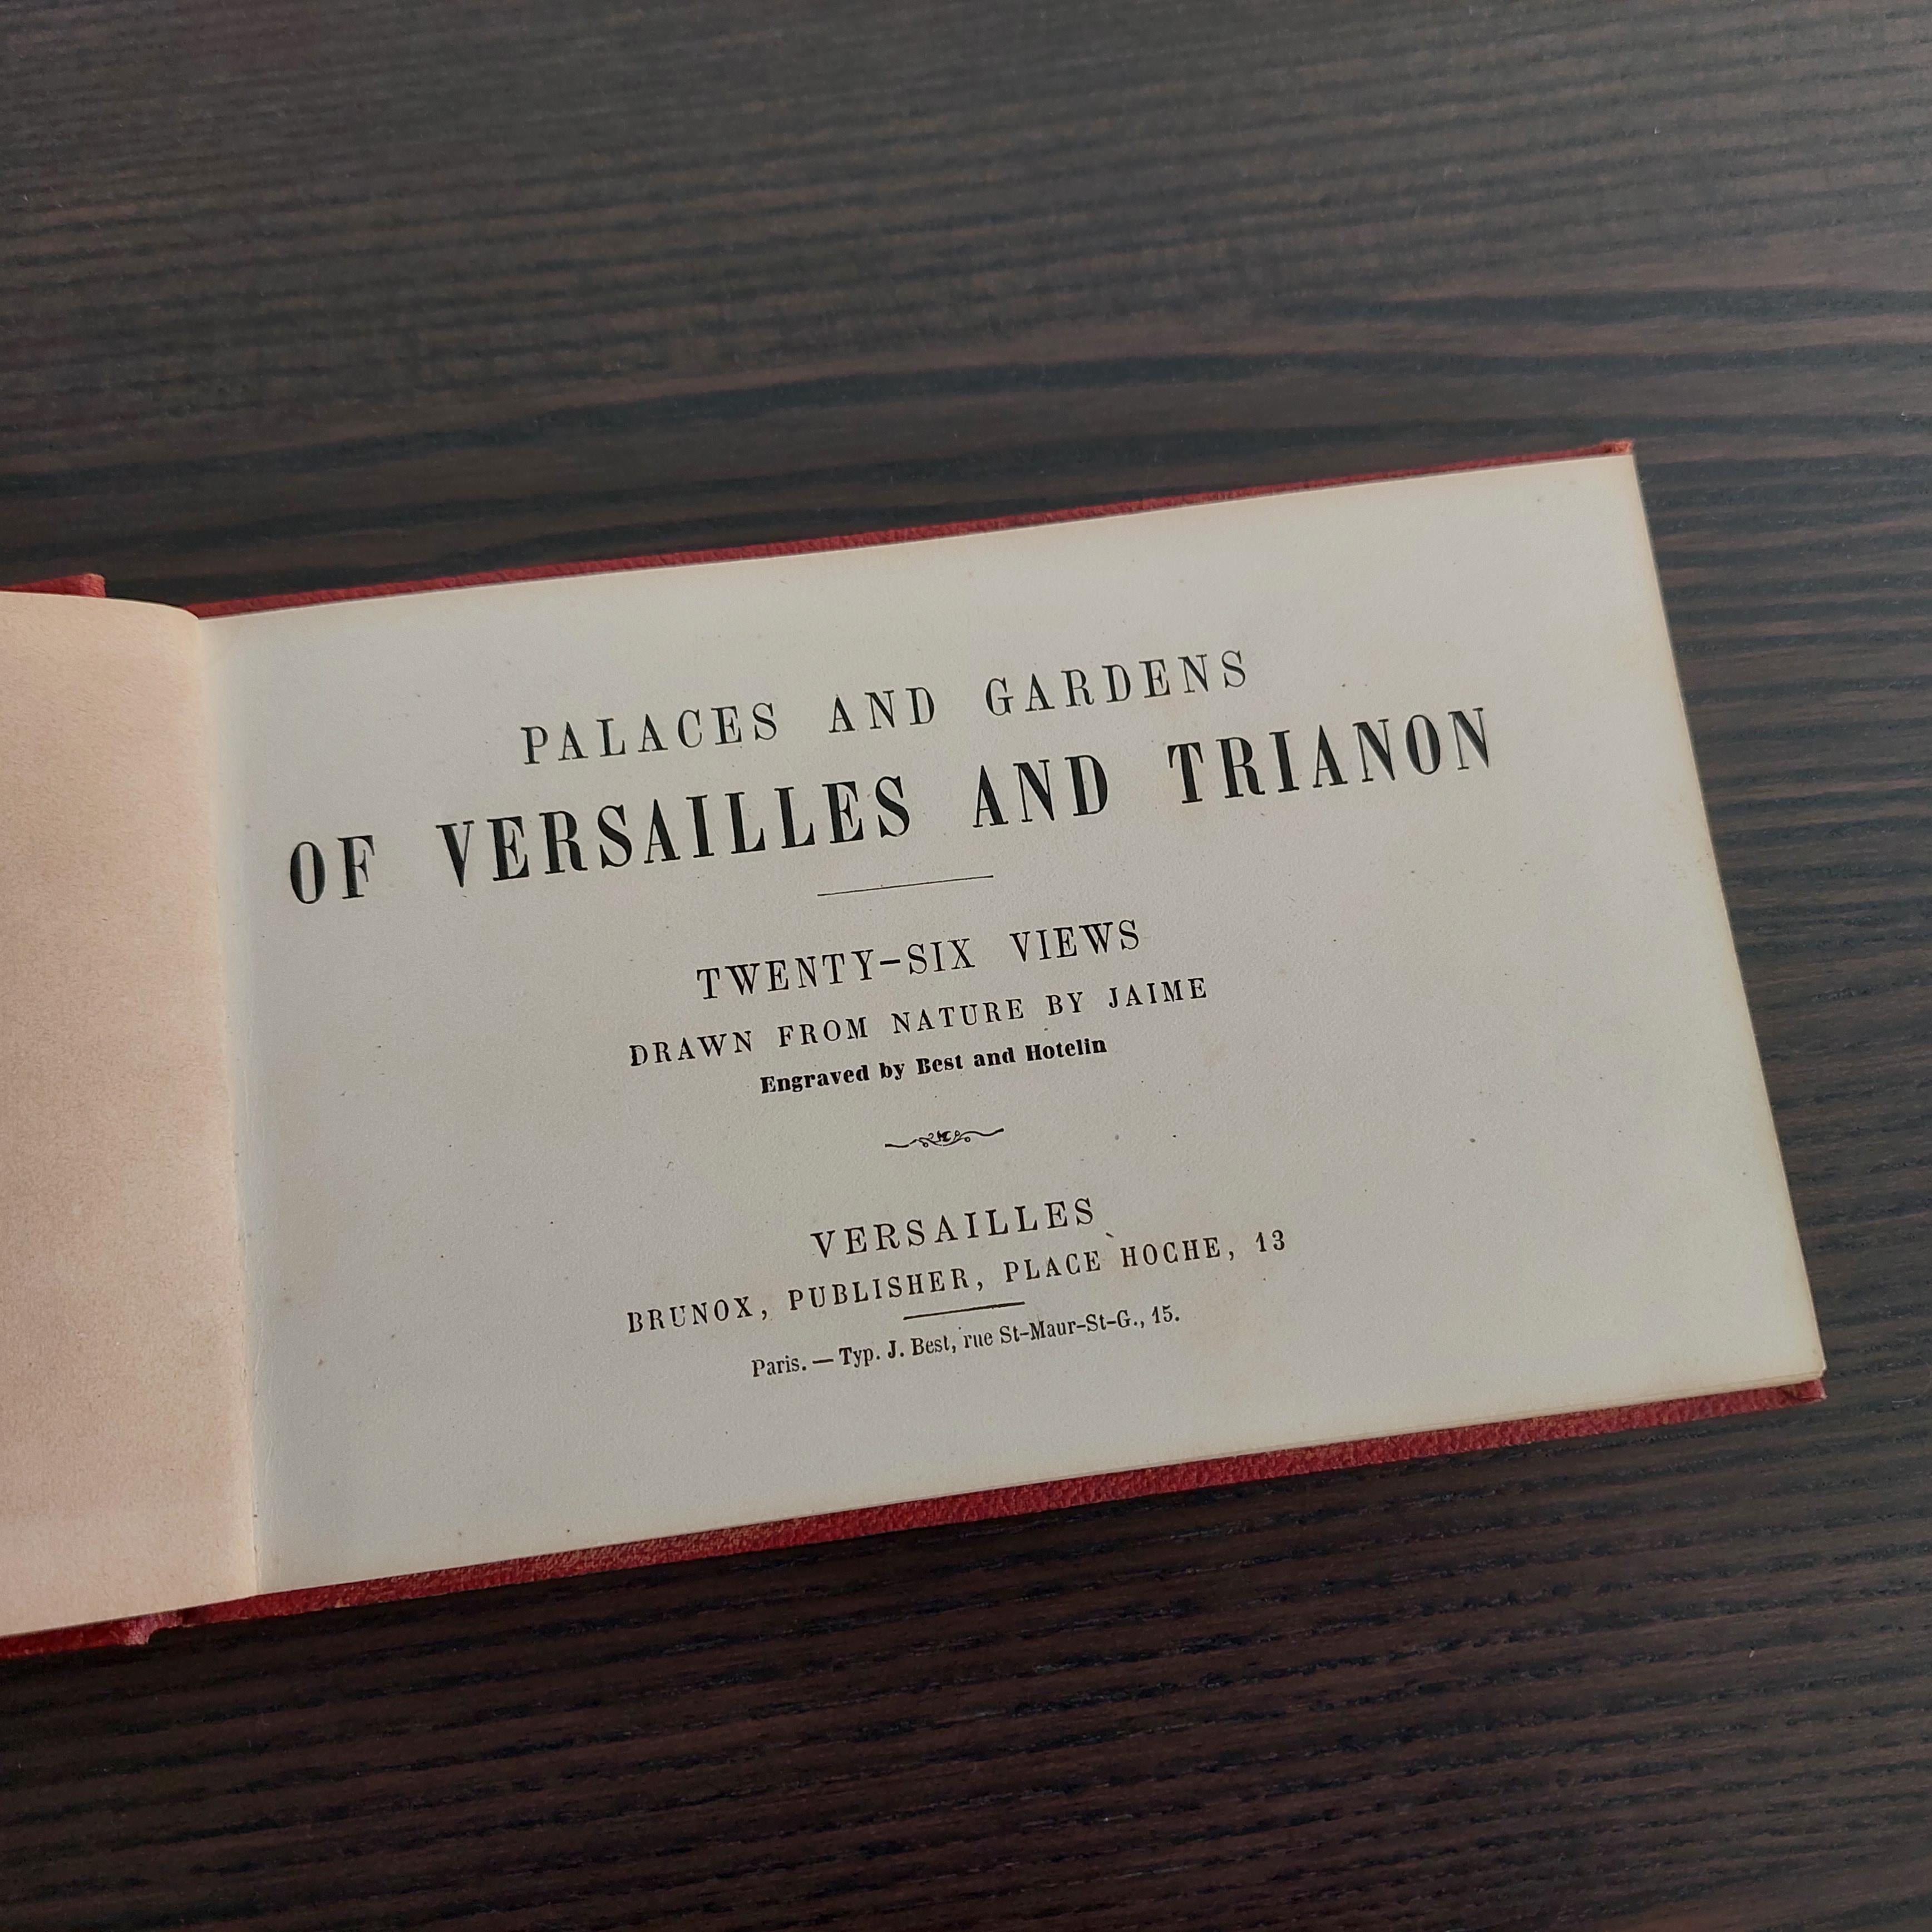 Small antique book titled 'Palaces and Gardens of Versailles and Trianon'. English edition containing 26 views of Versailles and Trianon. Drawn from nature by Jaime. Published by Brunox, circa 1880. 